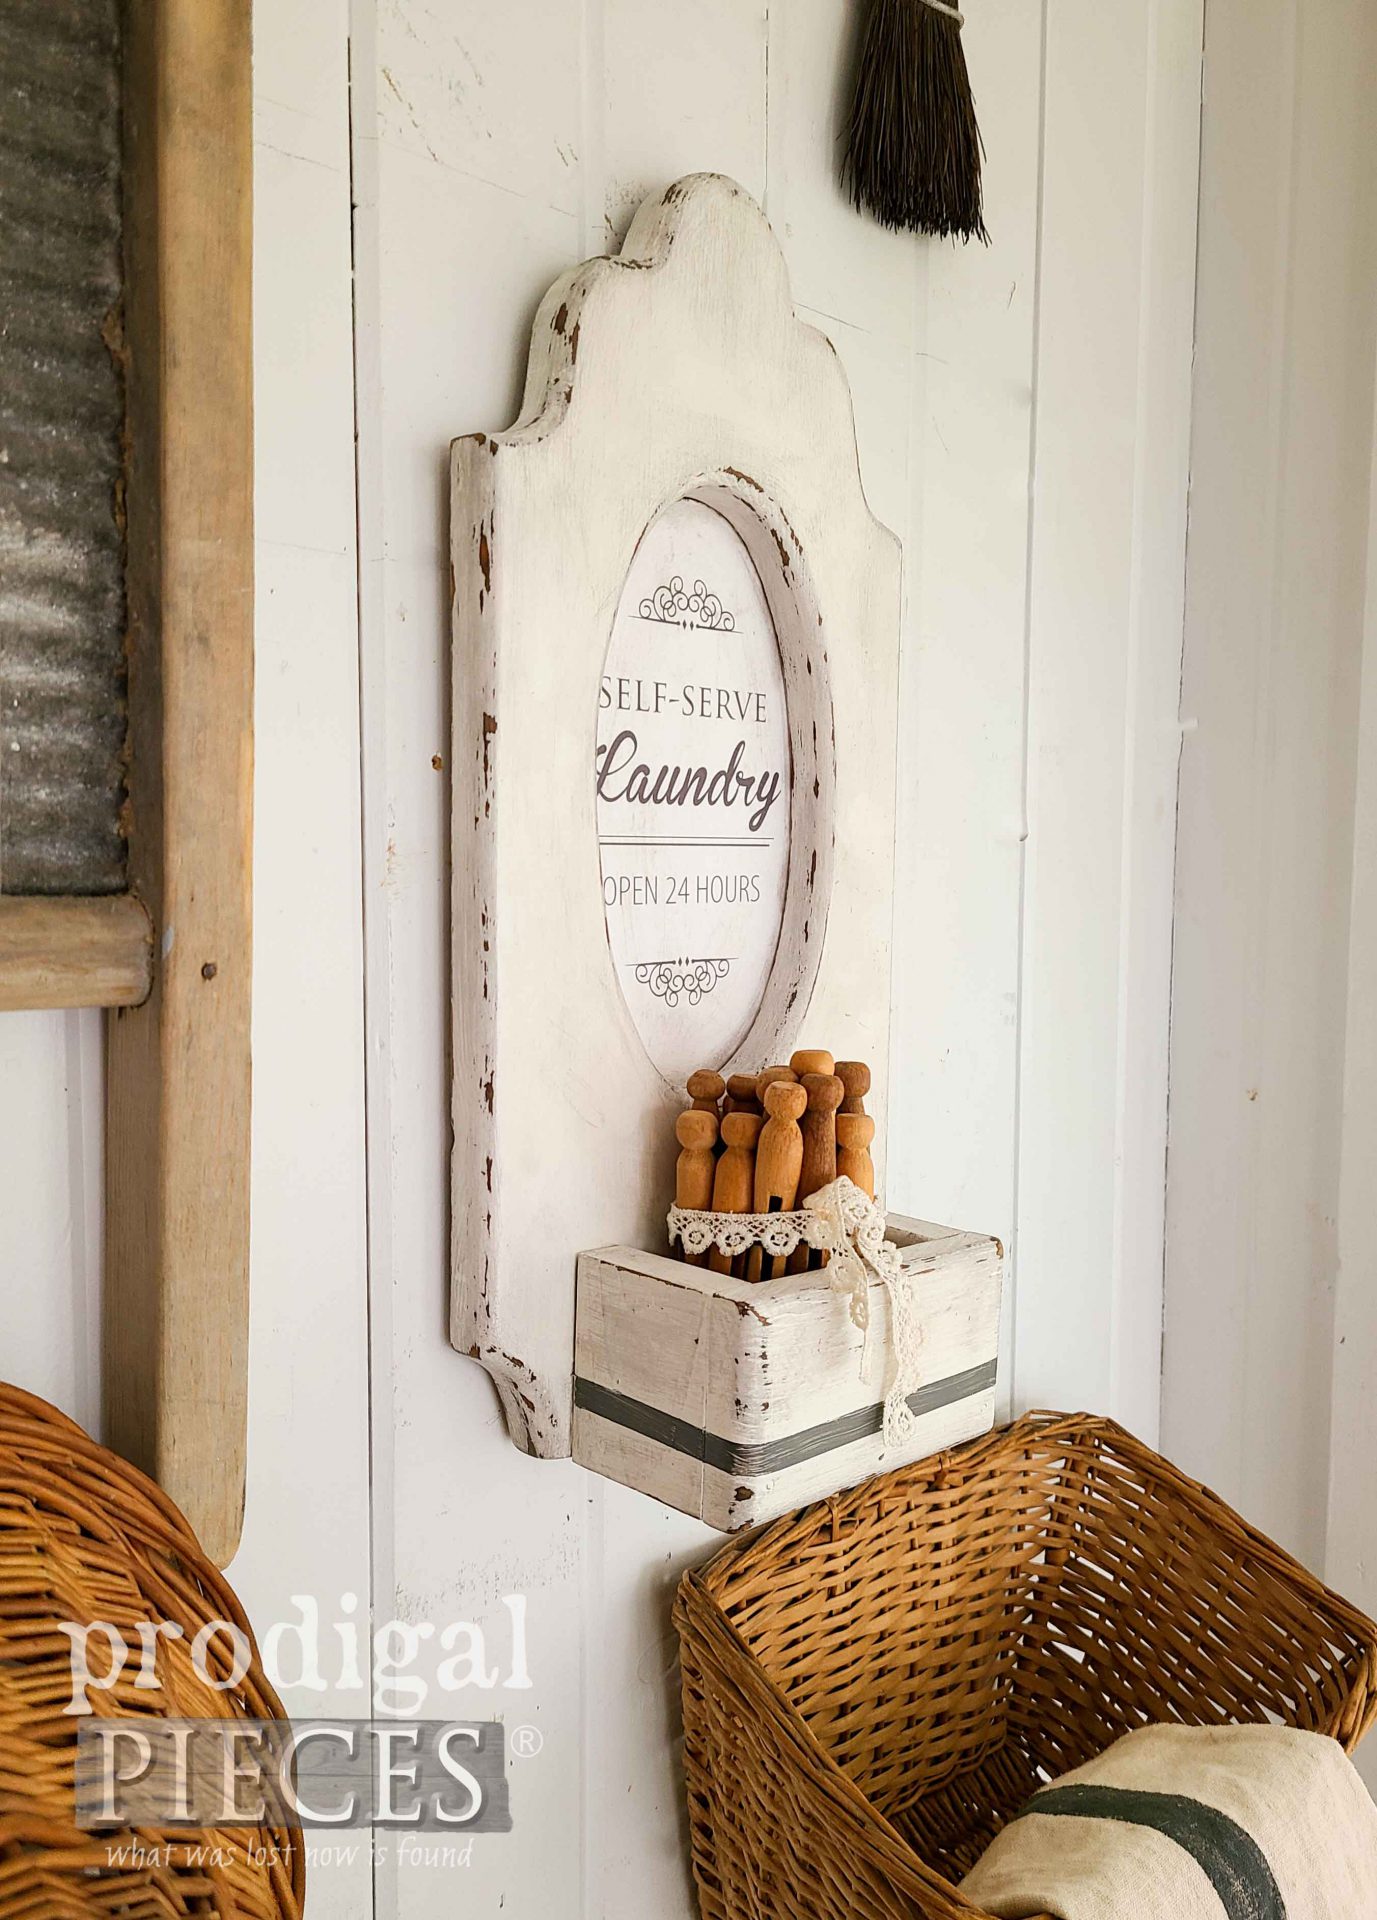 DIY Farmhouse Laundry Sign Holder for Thrifty Decor Makeovers by Larissa of Prodigal Pieces | prodigalpieces.com #prodigalpieces #farmhouse #laundry #diy